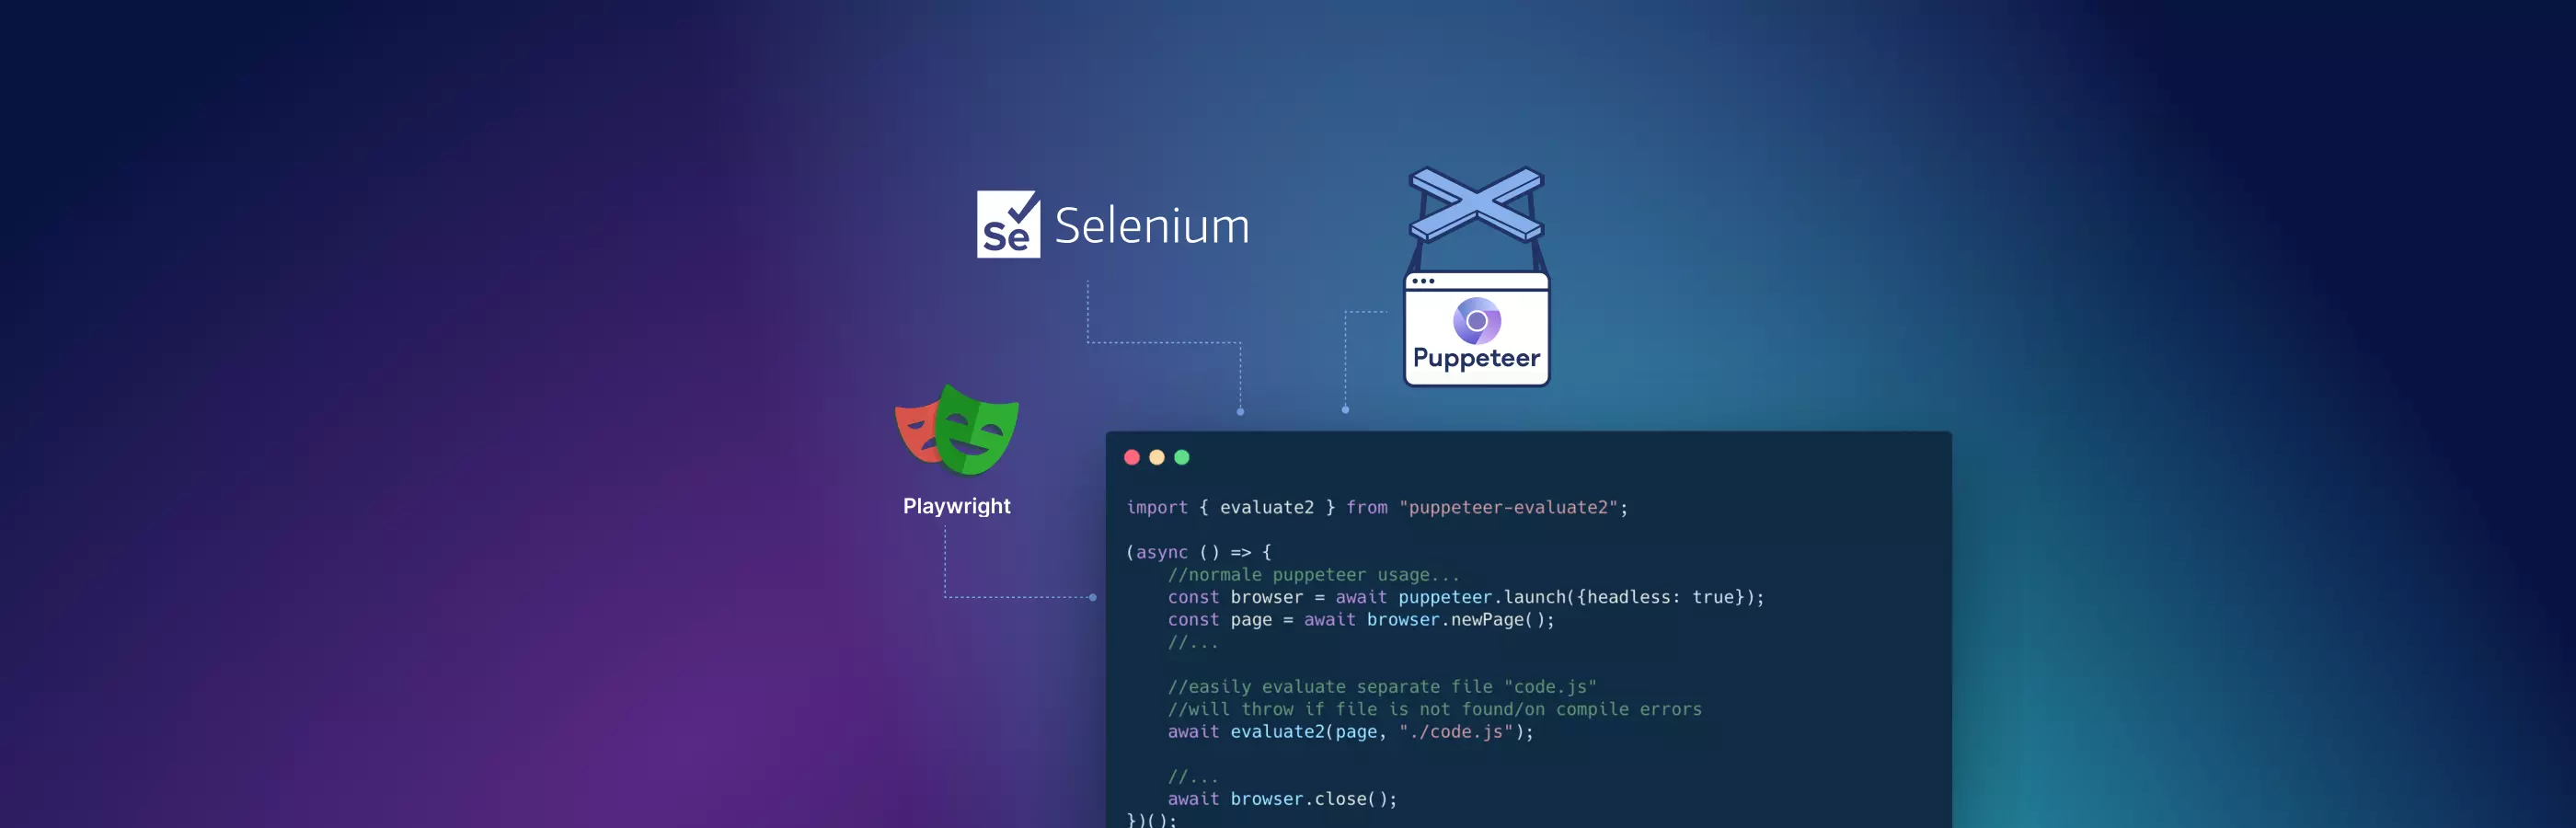 Using Undetectable API for integration with Selenium, Puppeteer, and Playwright